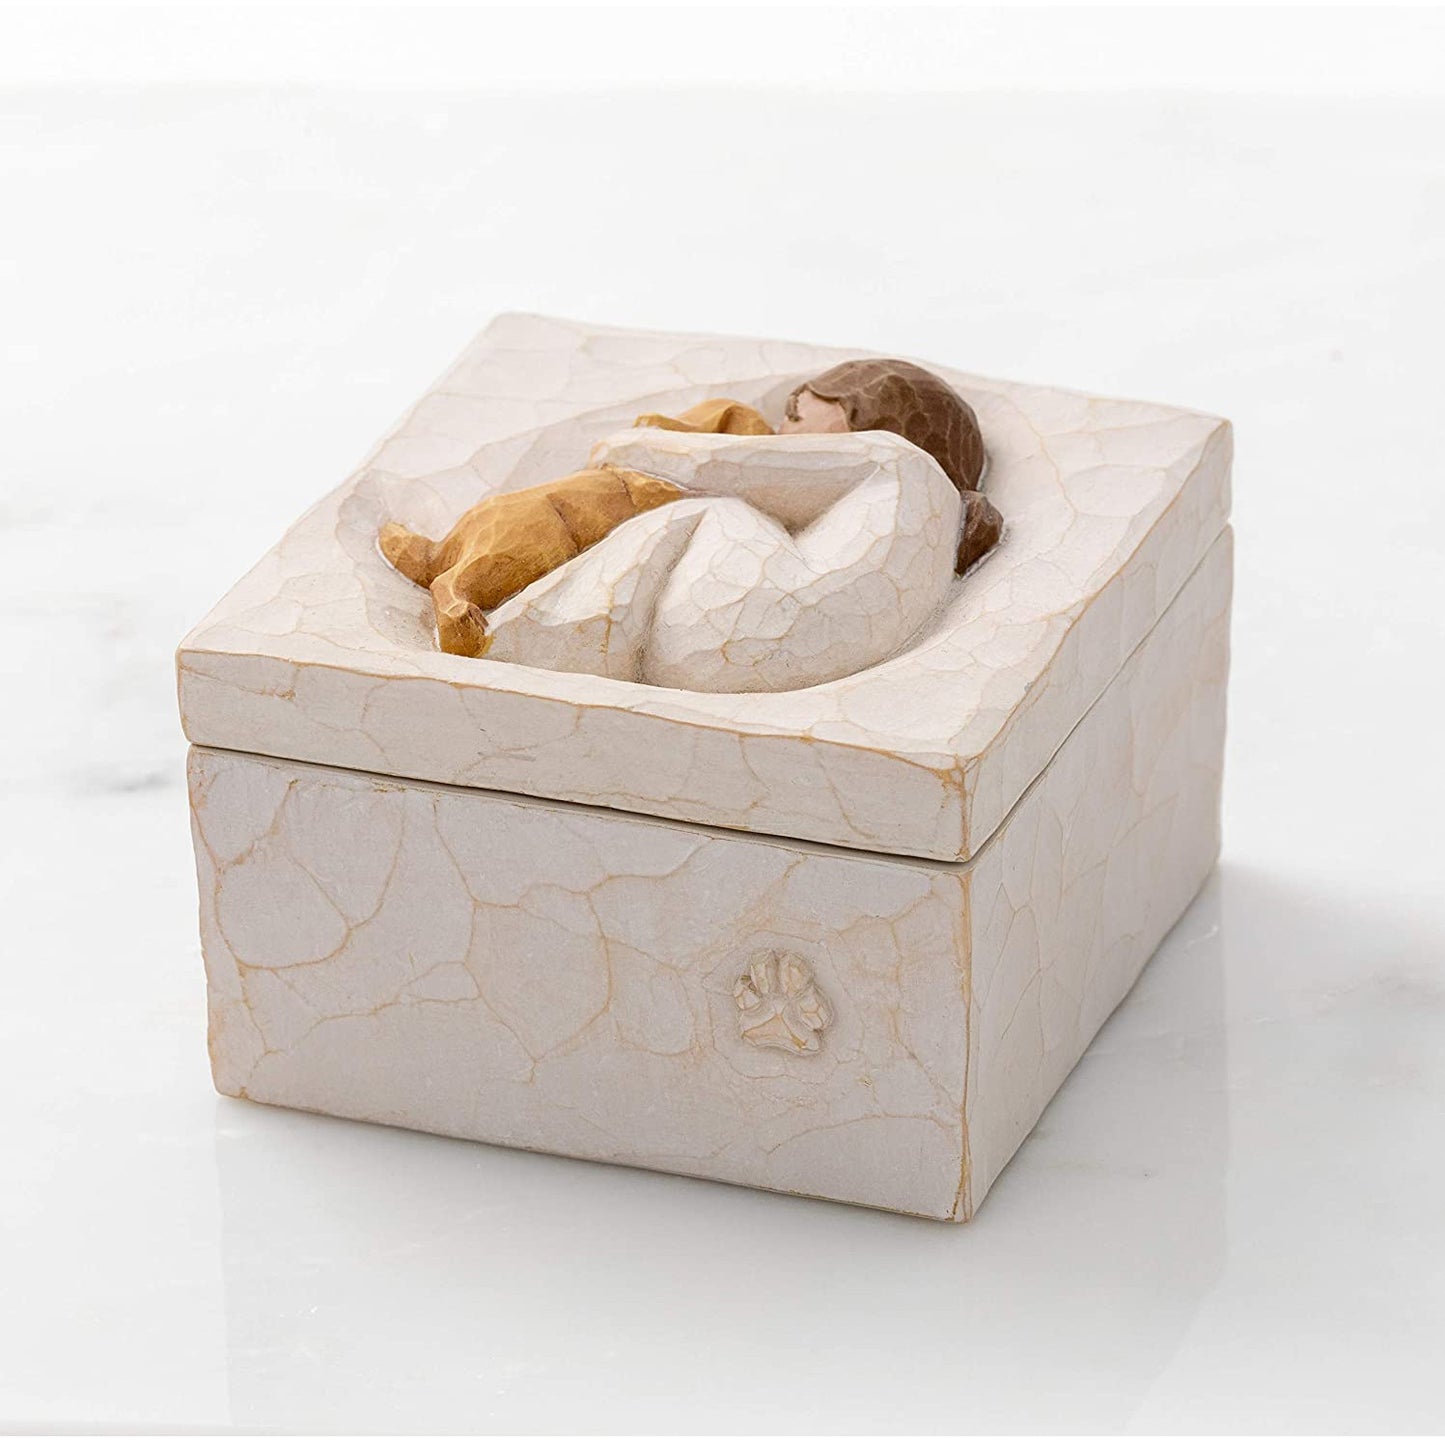 Decorative keepsake box woman with dog with lid closed